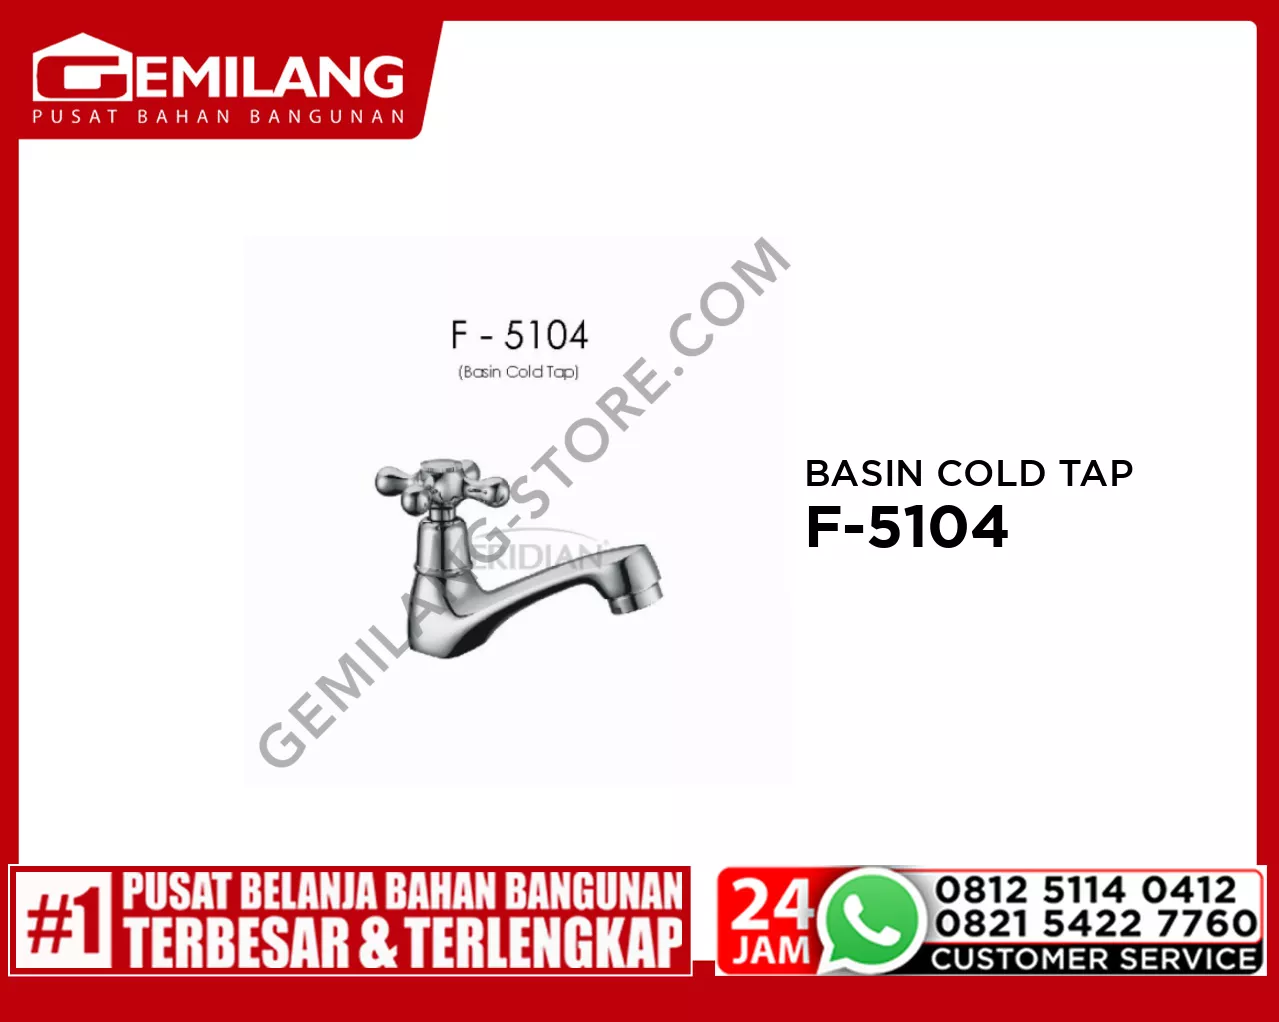 MERIDIAN BASIN COLD TAP F-5104